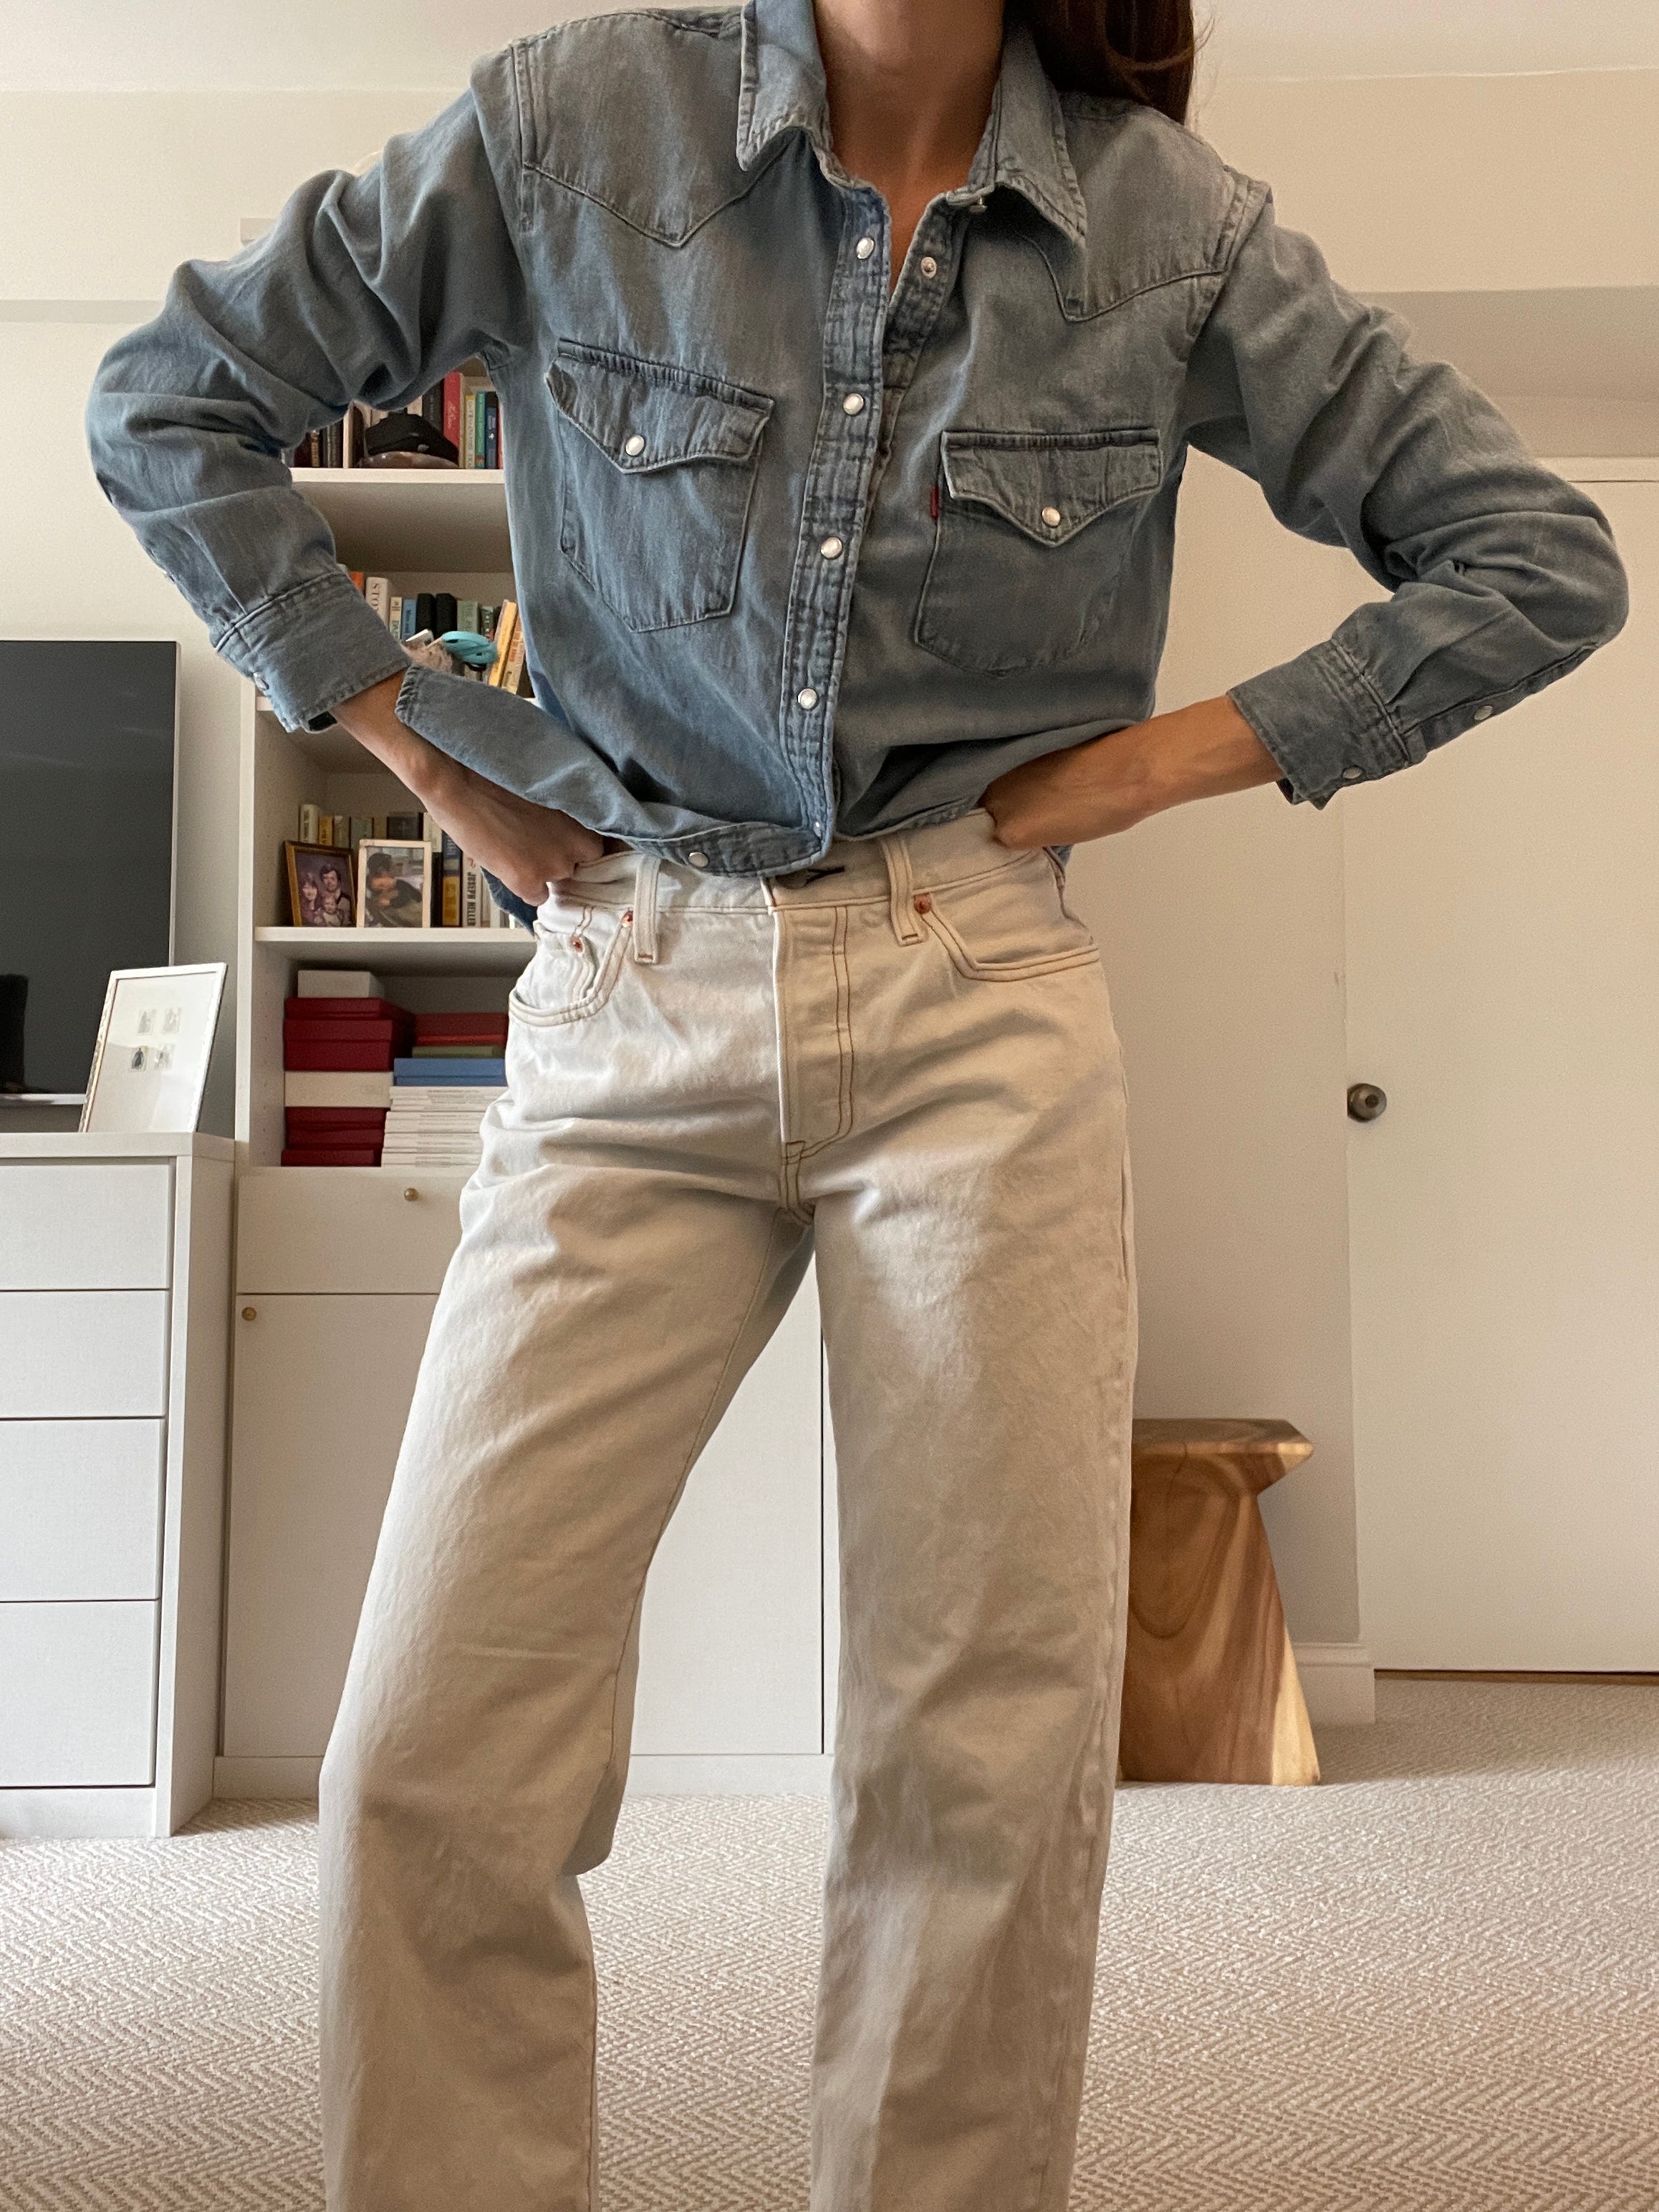 How to Wear Levi's 501 Jeans: A Guide for Chic Women  Levi jeans 501,  Jeans outfit women, Jeans outfit casual